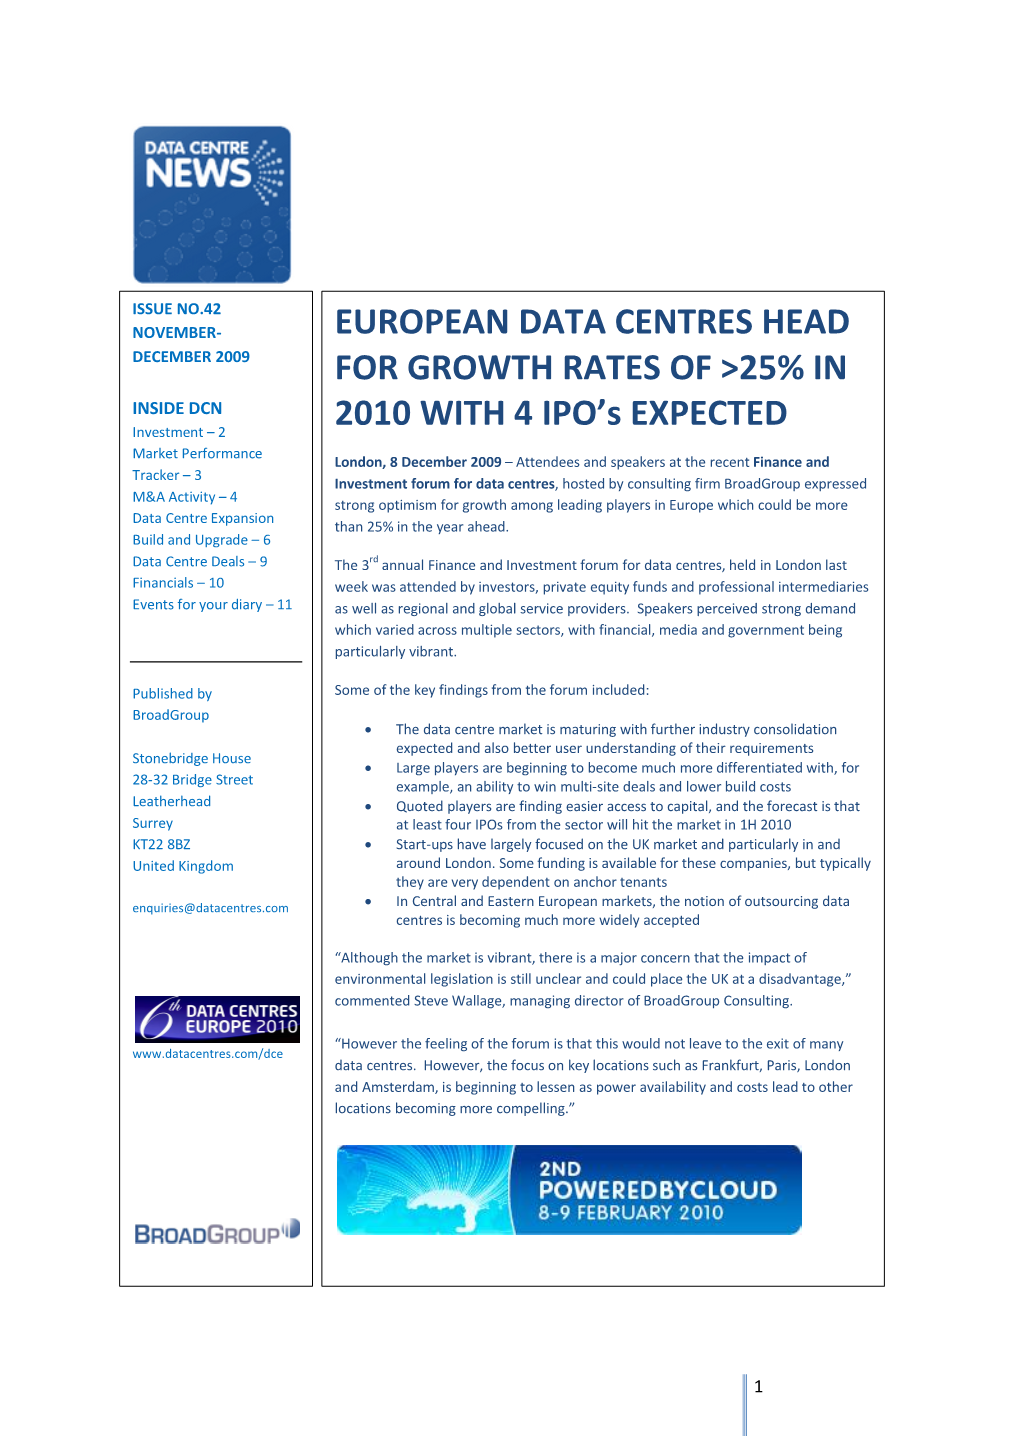 EUROPEAN DATA CENTRES HEAD for GROWTH RATES of &gt;25% IN